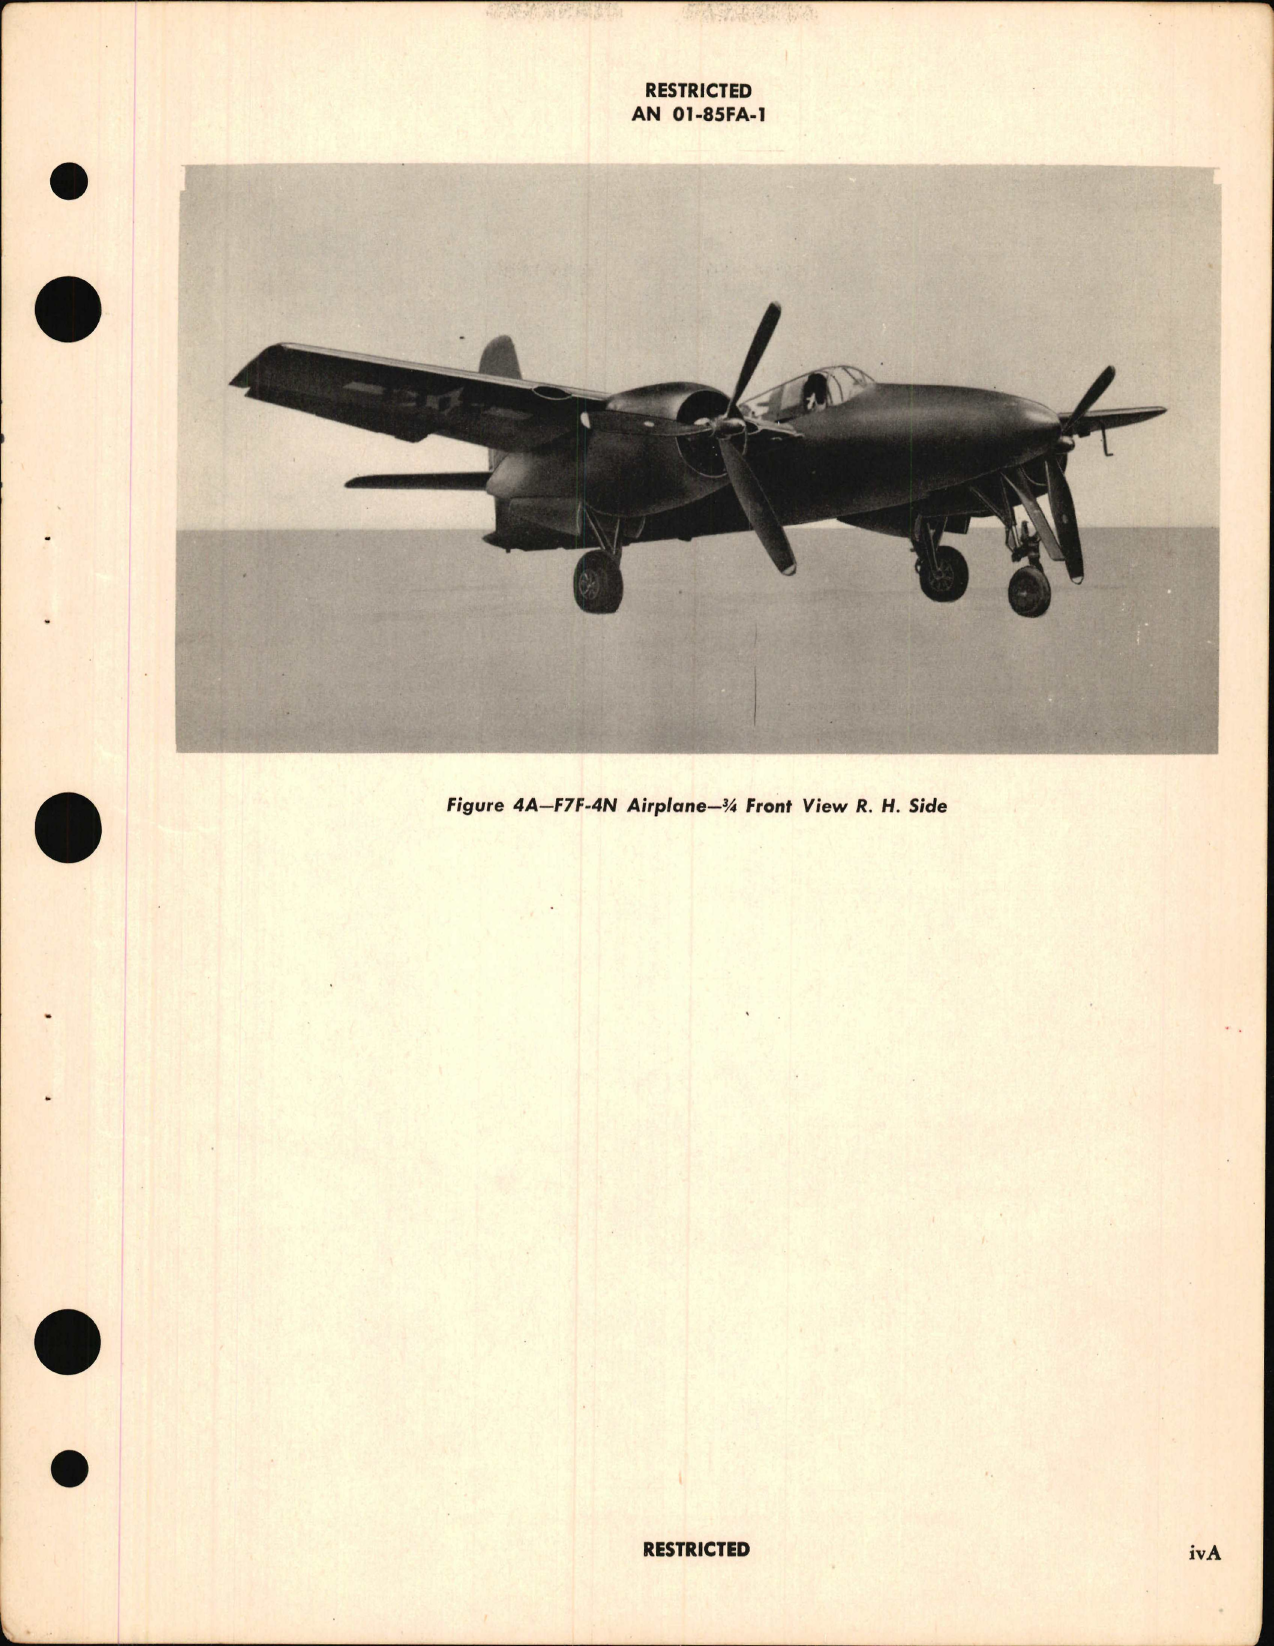 Sample page 9 from AirCorps Library document: Pilot's Handbook for F7F-1N, F7F-2N, F7F-3, F7F-3N, and F7F-4N